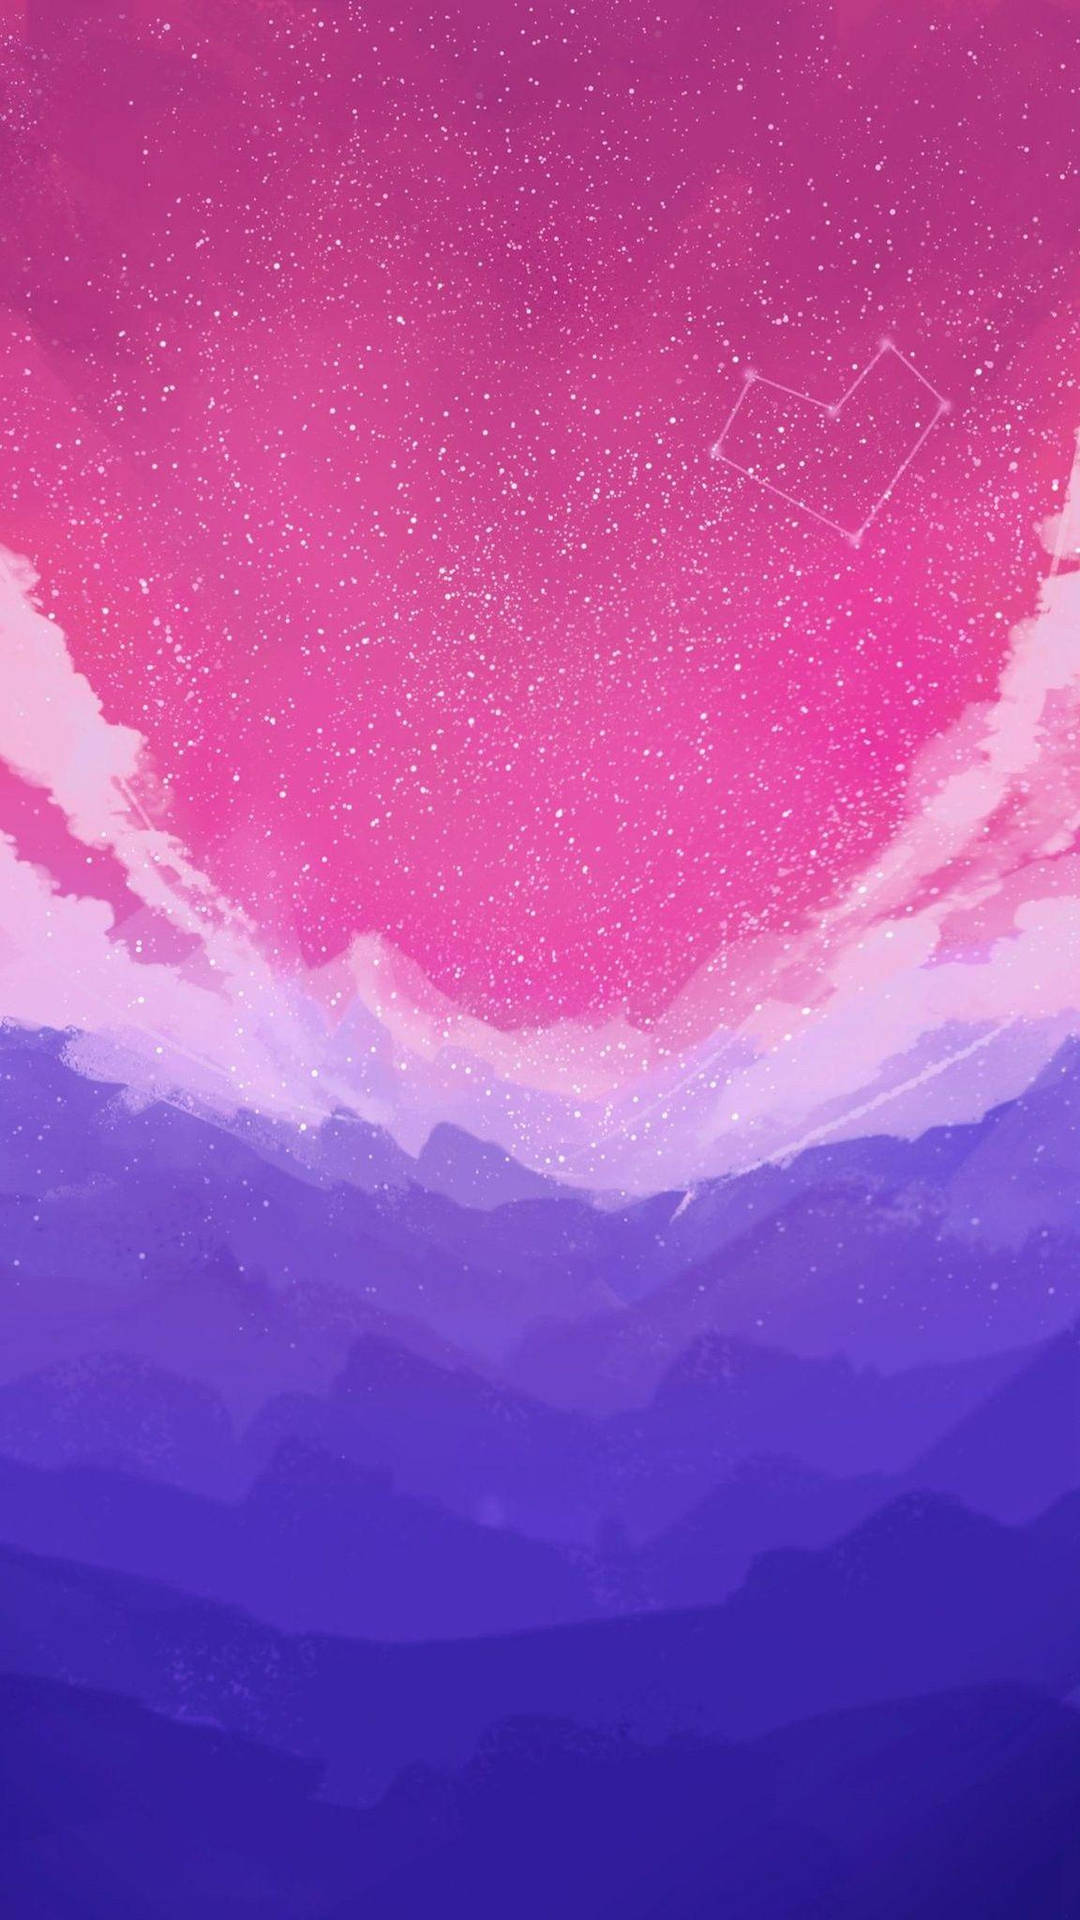 Bisexual Aesthetic Pink Sky Background